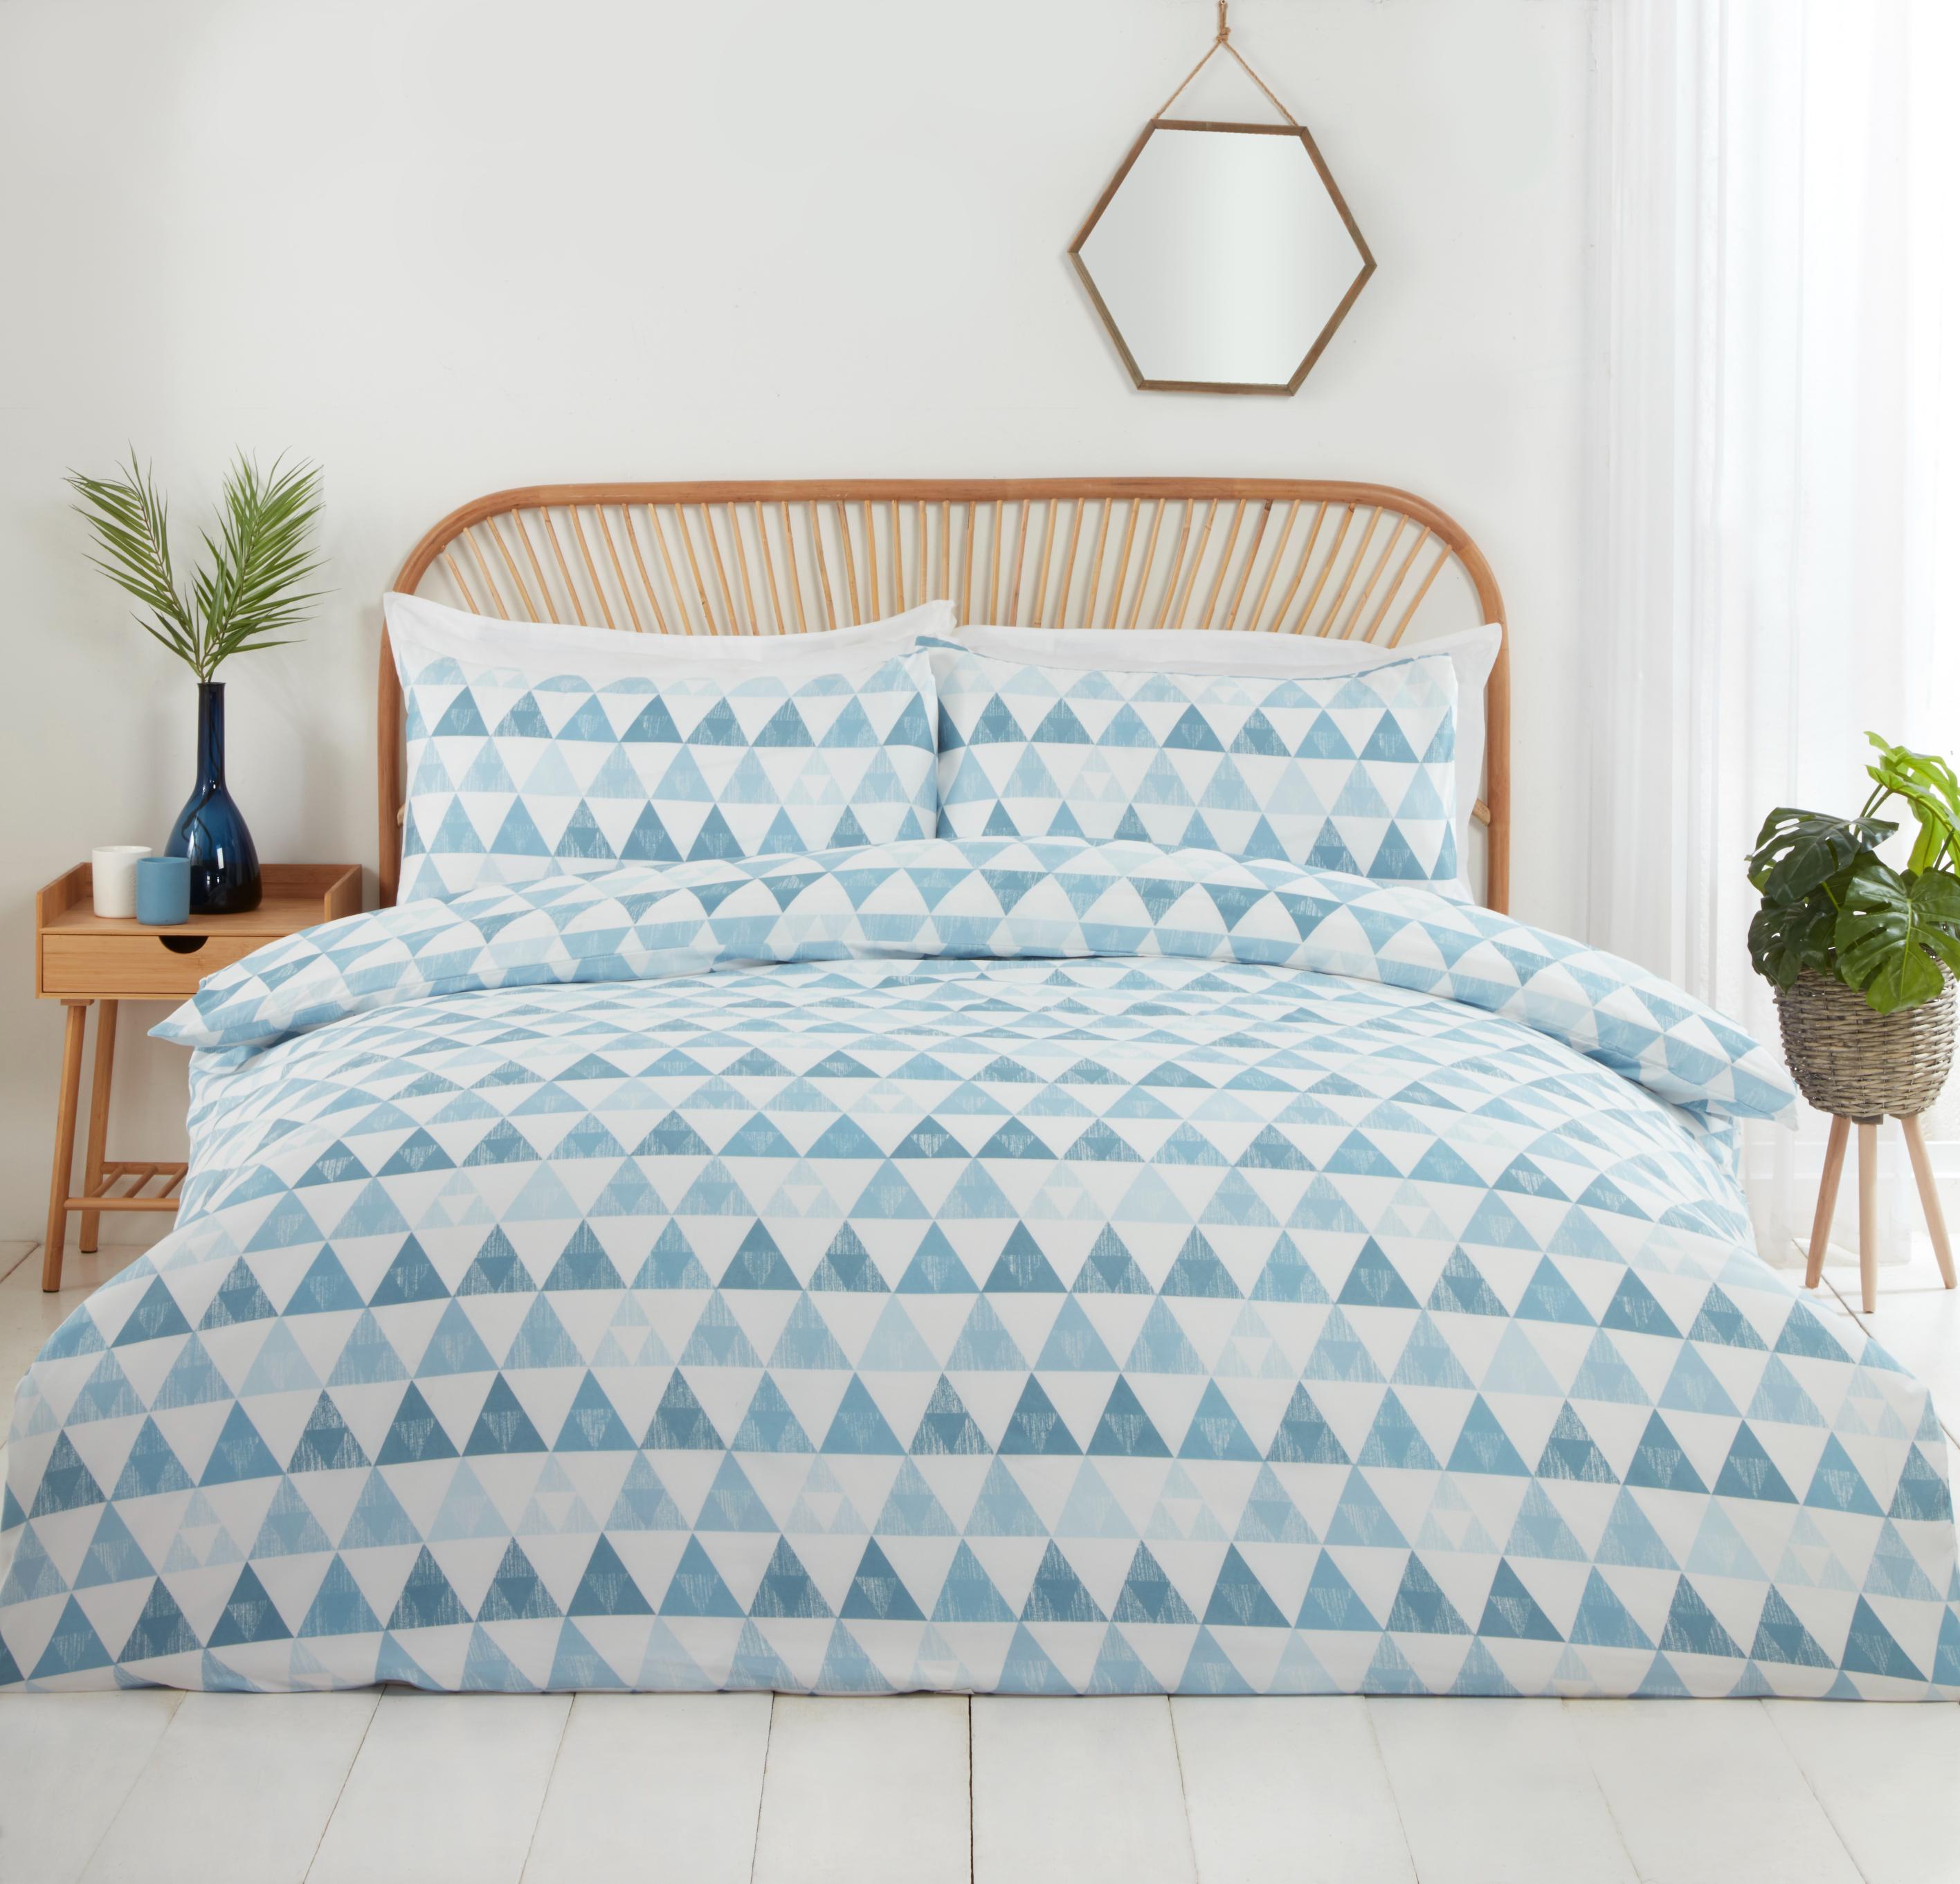 Lewis’s Printed Bed In A Bag - Blue Geometric Triangle - Double  | TJ Hughes